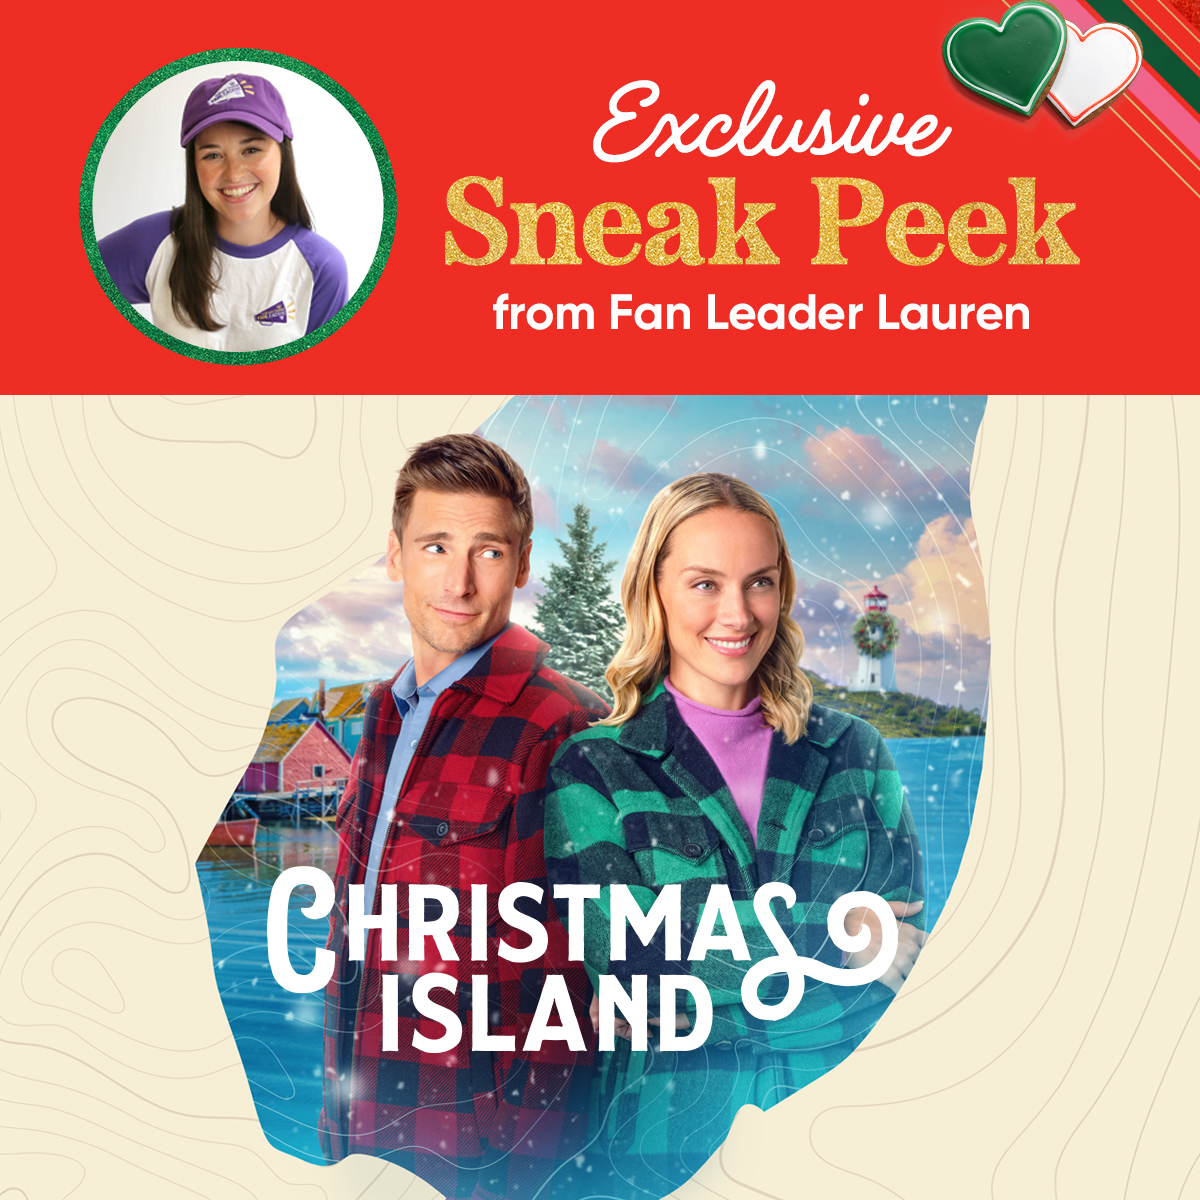 Want to see an EXCLUSIVE sneak peek of our upcoming movie, #ChristmasIsland? Follow our fan leader, Lauren, on Instagram. 👉 Fan Leader Lauren: instagram.com/4theloveofHall…